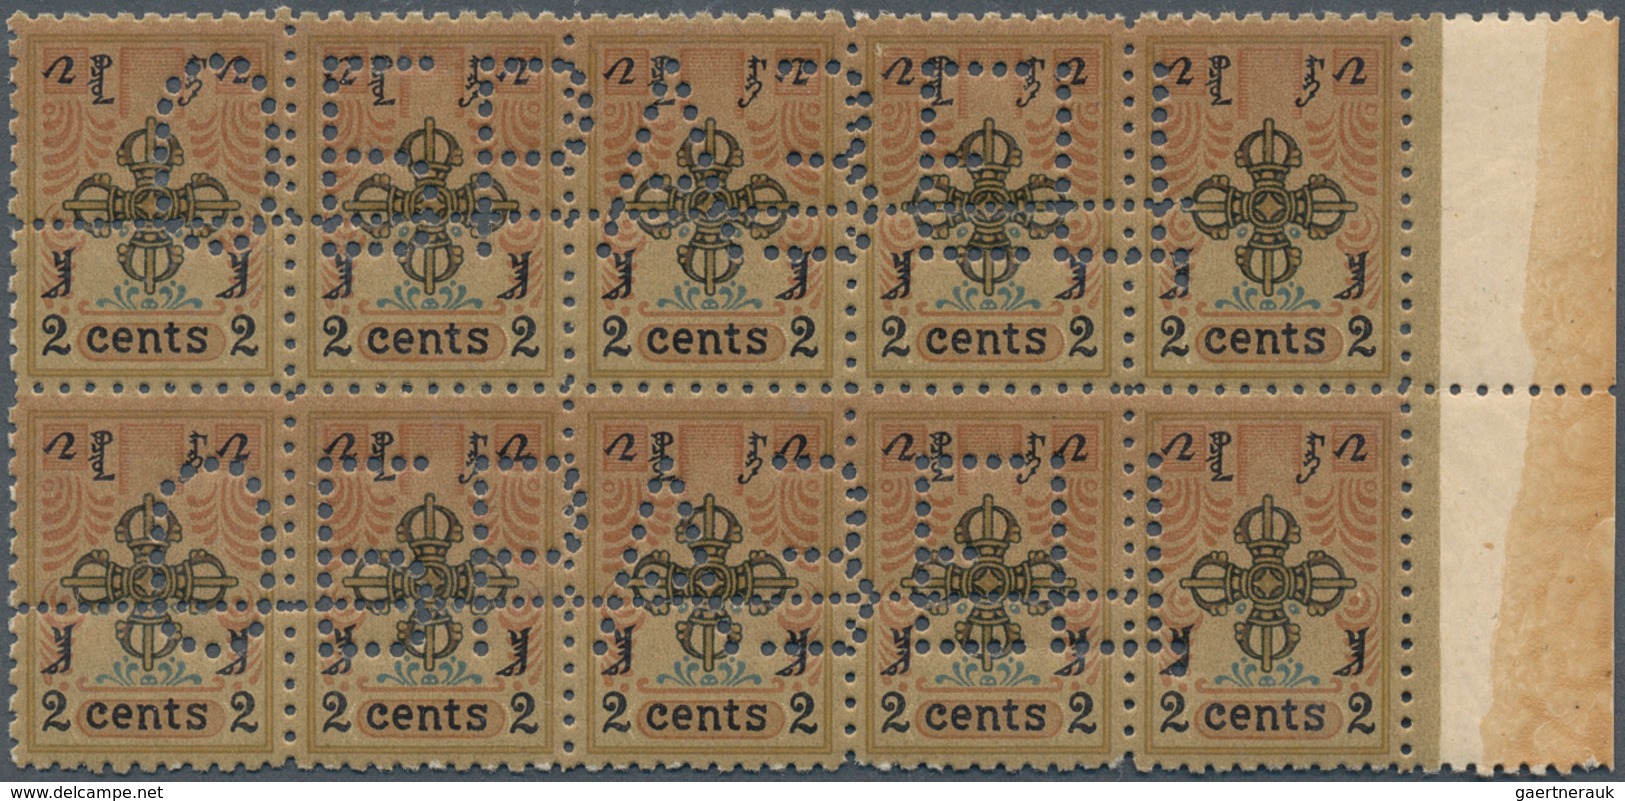 Mongolei: 1924 First Issue 2c. Right Hand Marginal Block Of 10, Perf 10, Additionally Perforated "ОБ - Mongolei